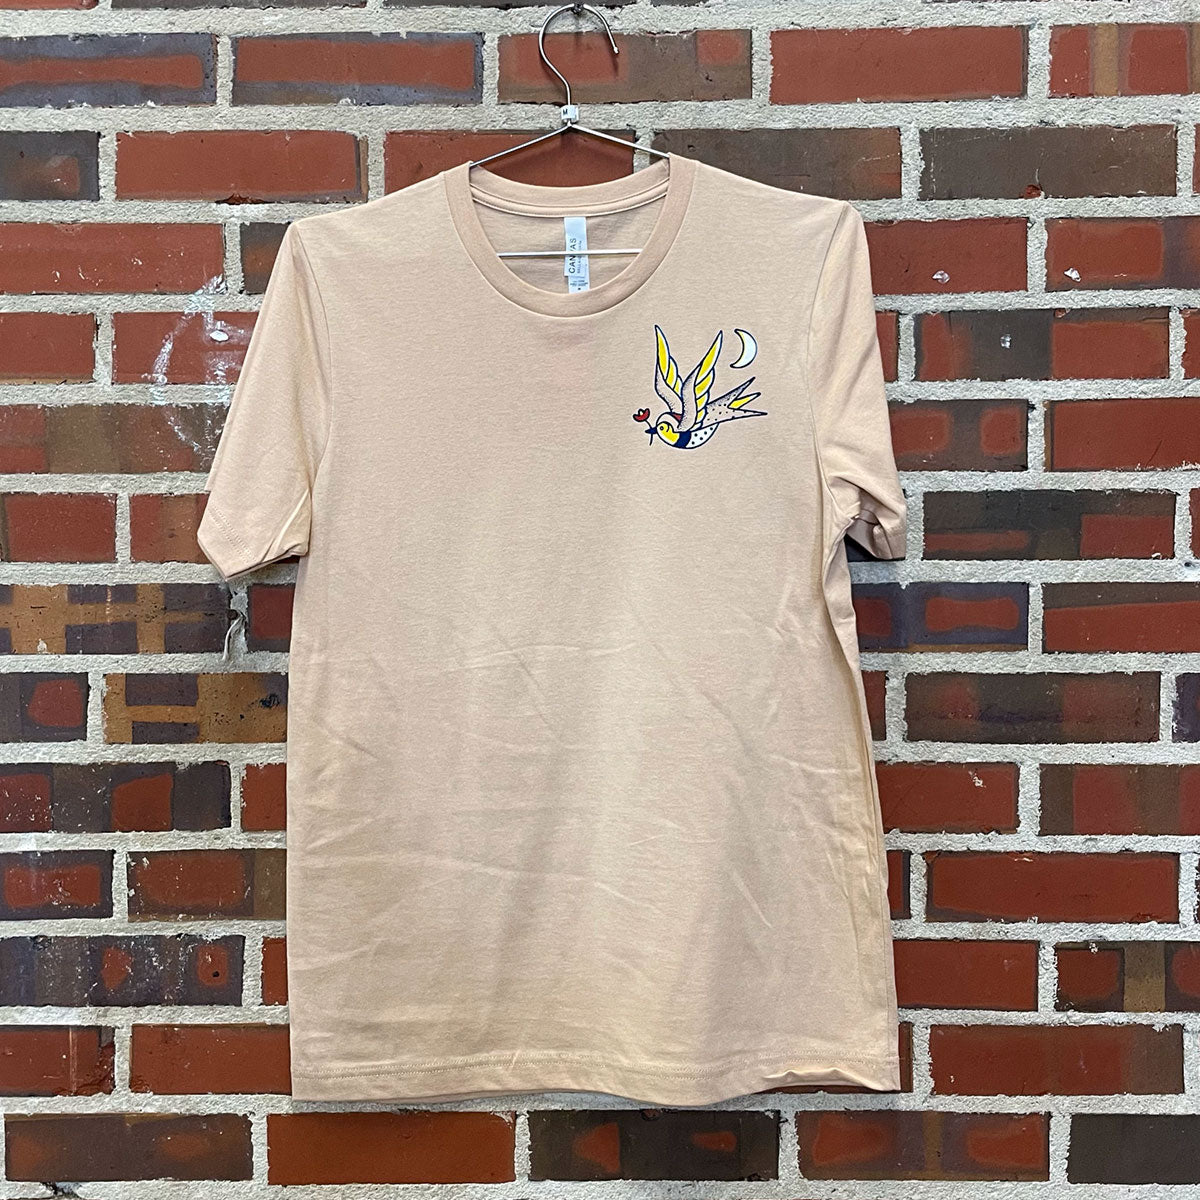 Cream colored shirt of the alabama state bird holding the alabama state flower drawn in american traditional tattoo style